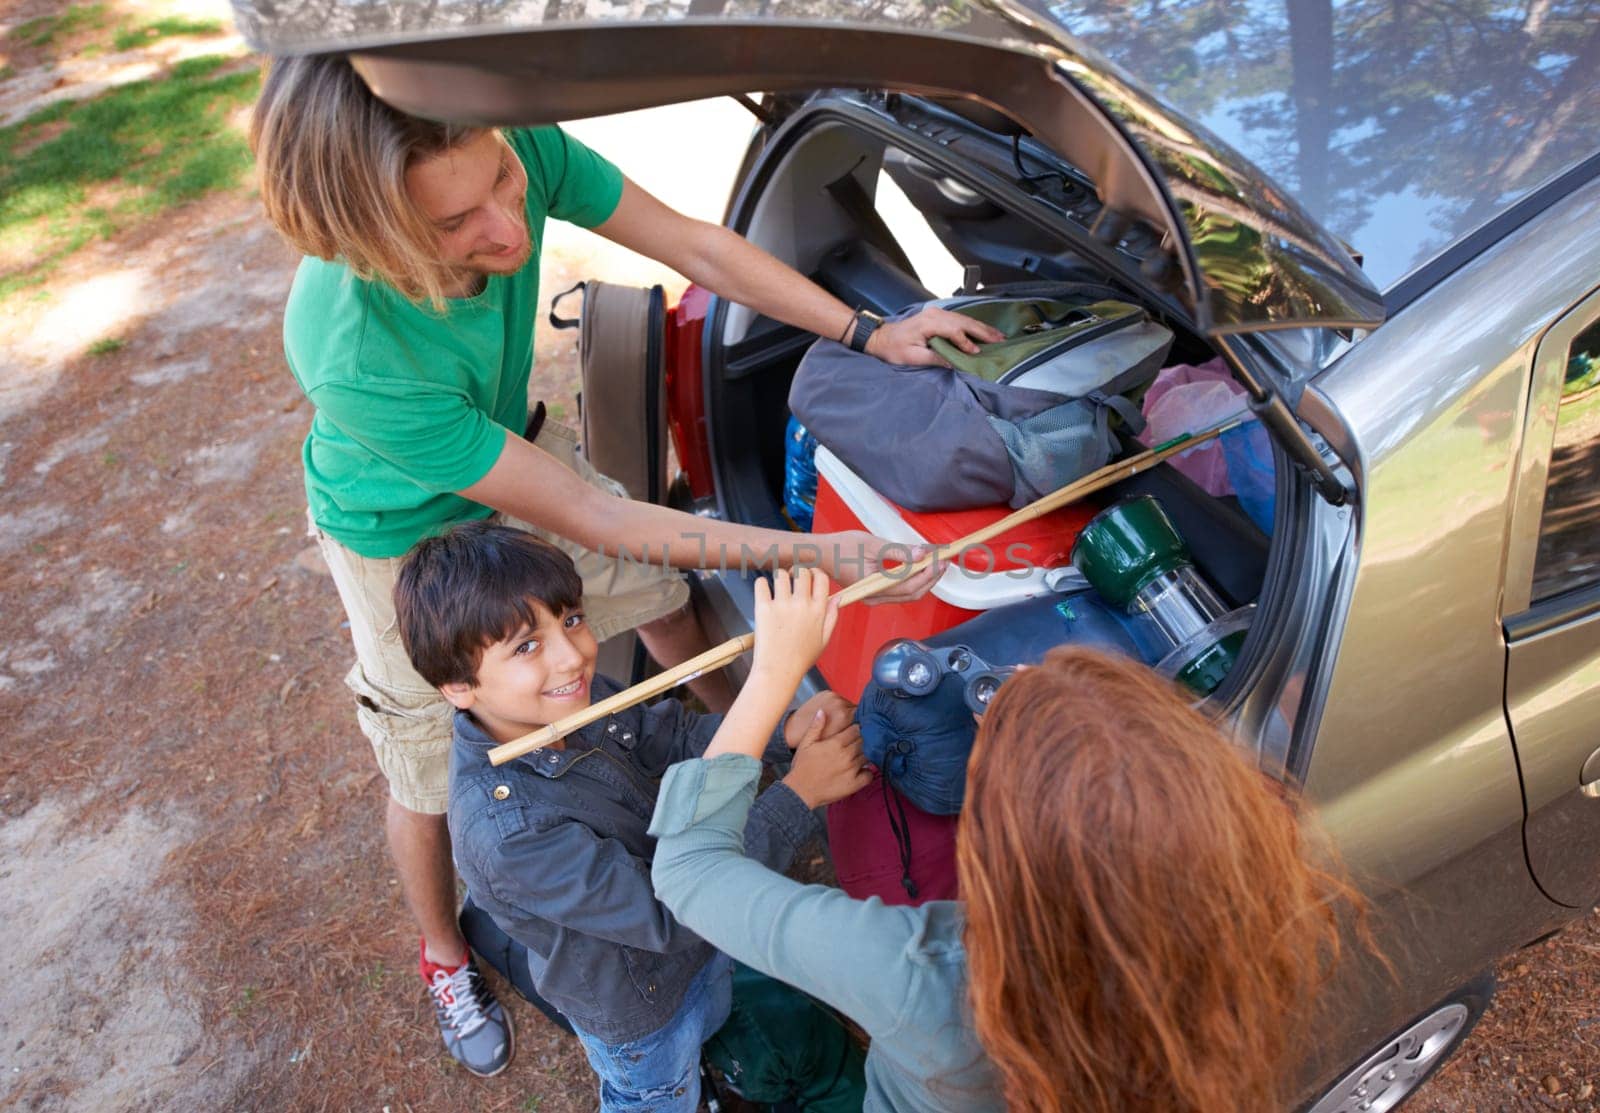 Happy family, car and packing for camping road trip, holiday or vacation above in nature outdoors. Top view of dad and kids getting ready for travel, camp adventure or getaway together in the forest by YuriArcurs